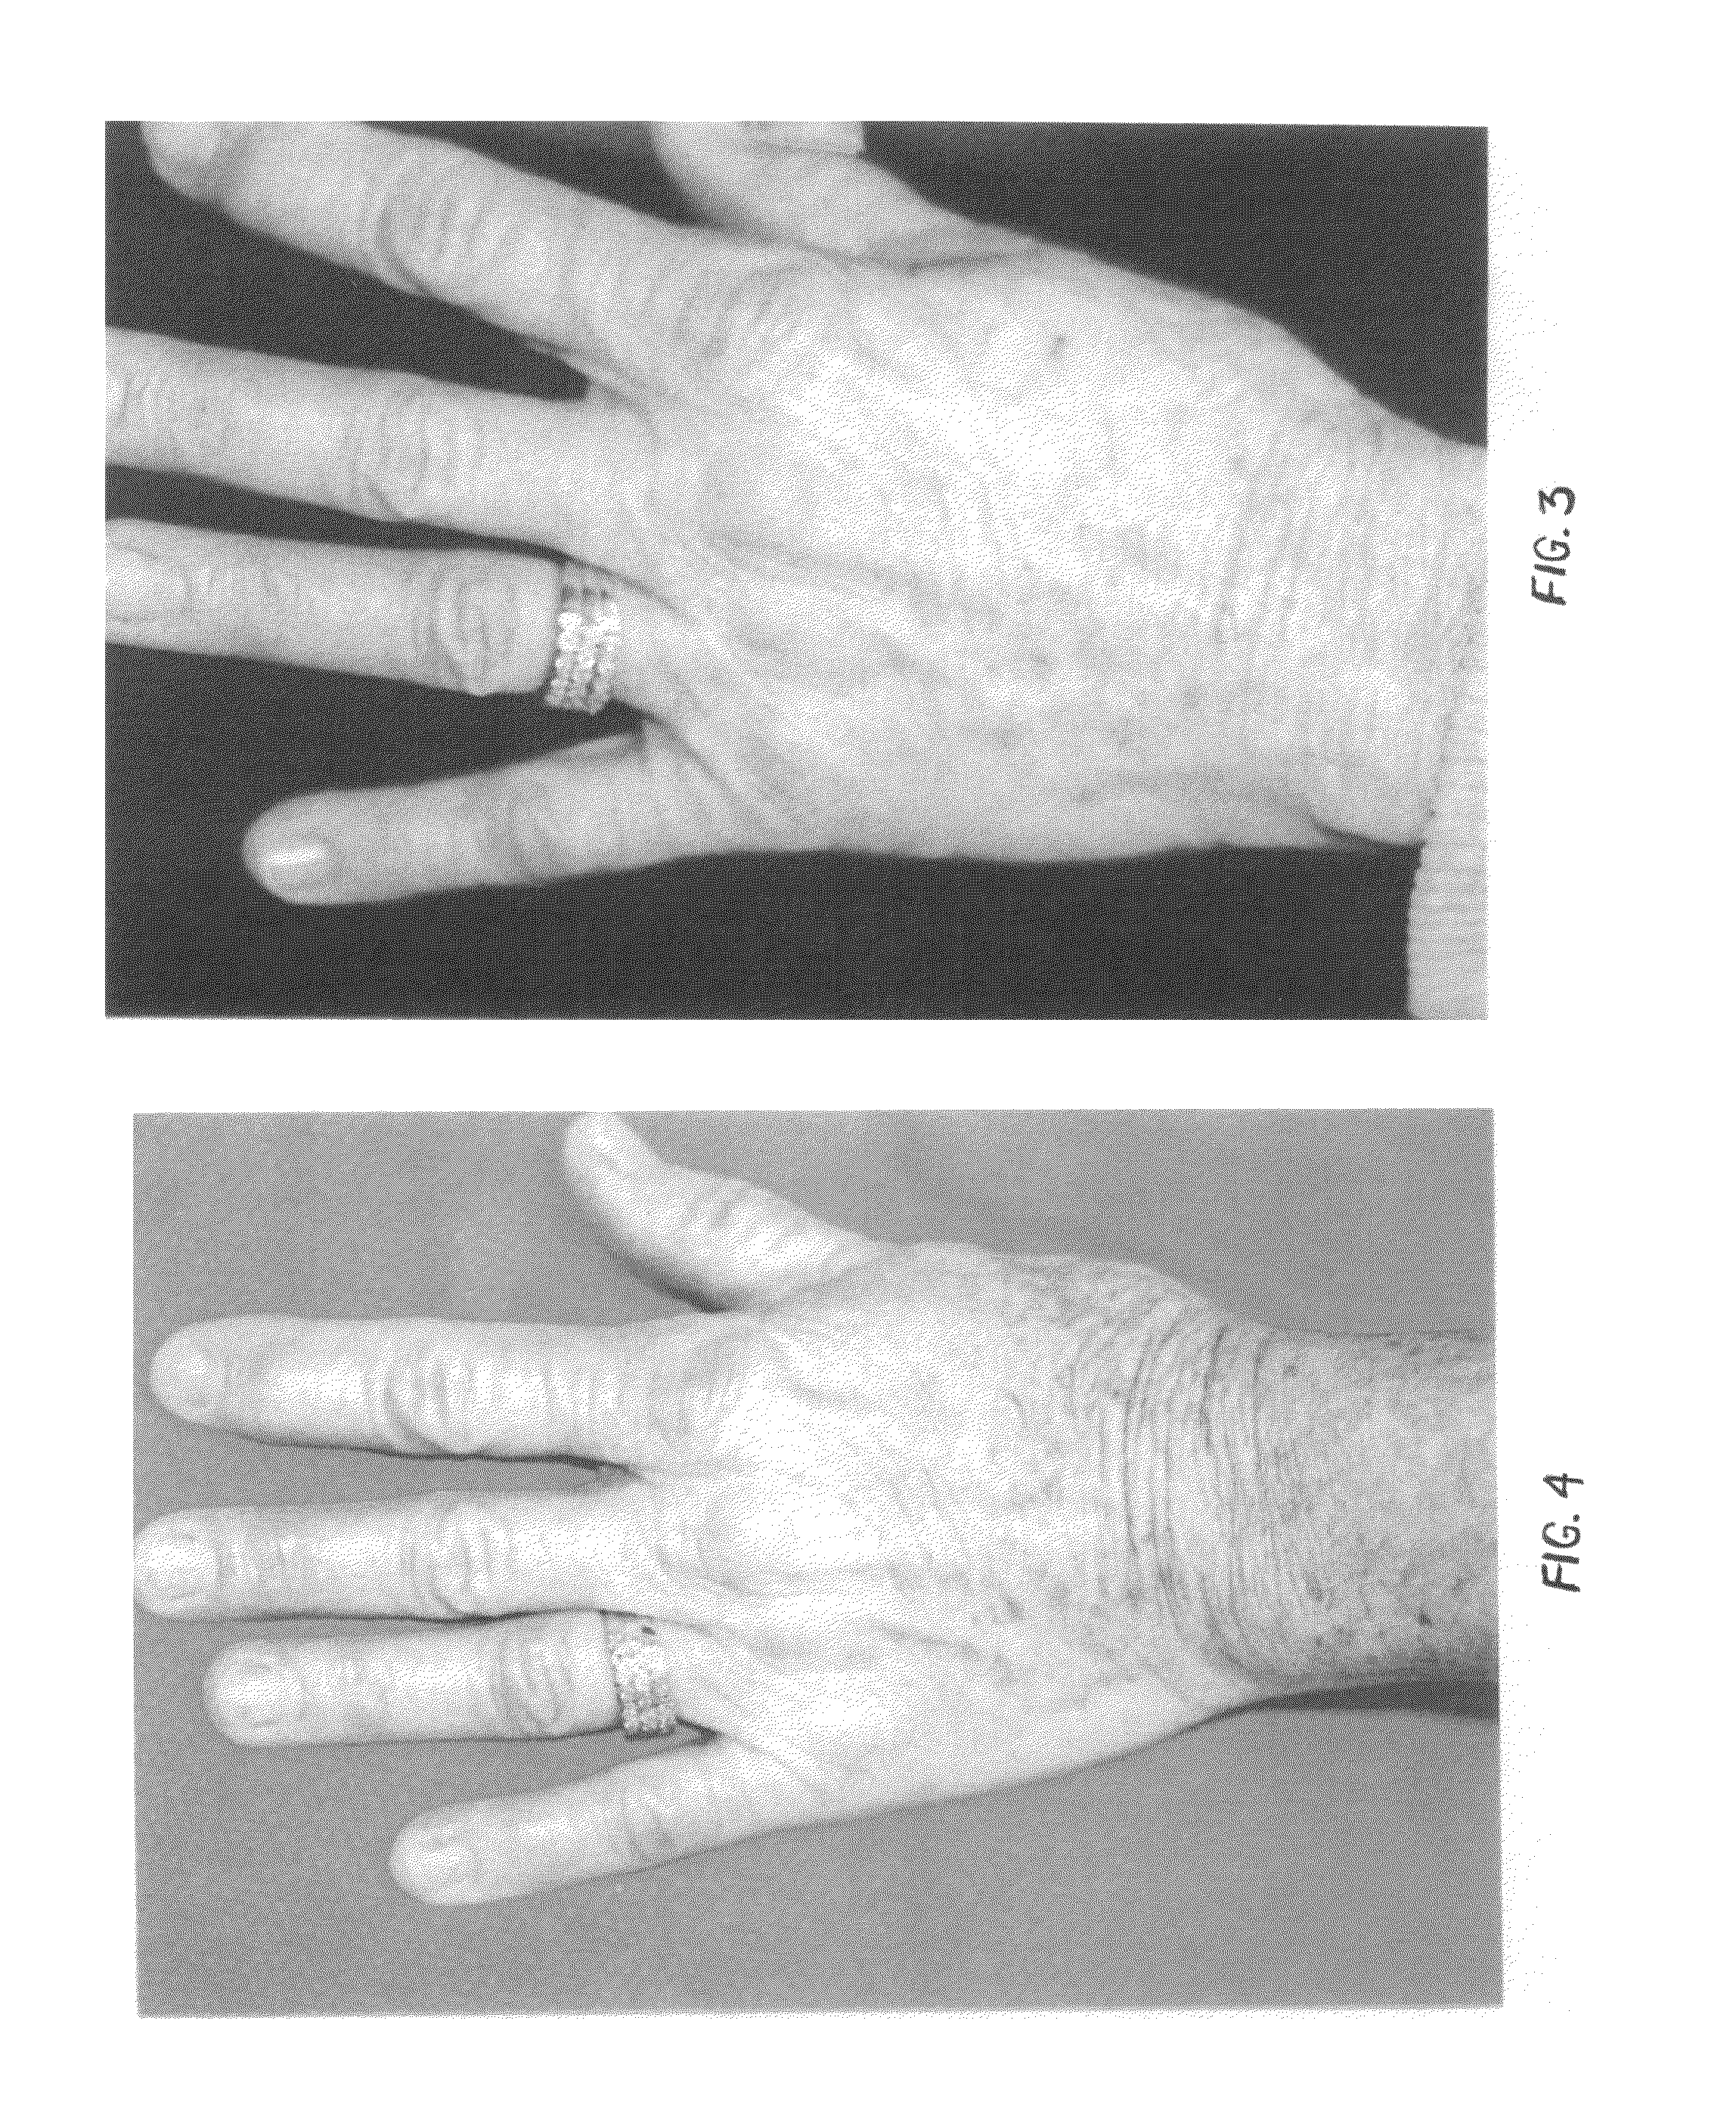 Topical compositions for anti-aging and methods of using same